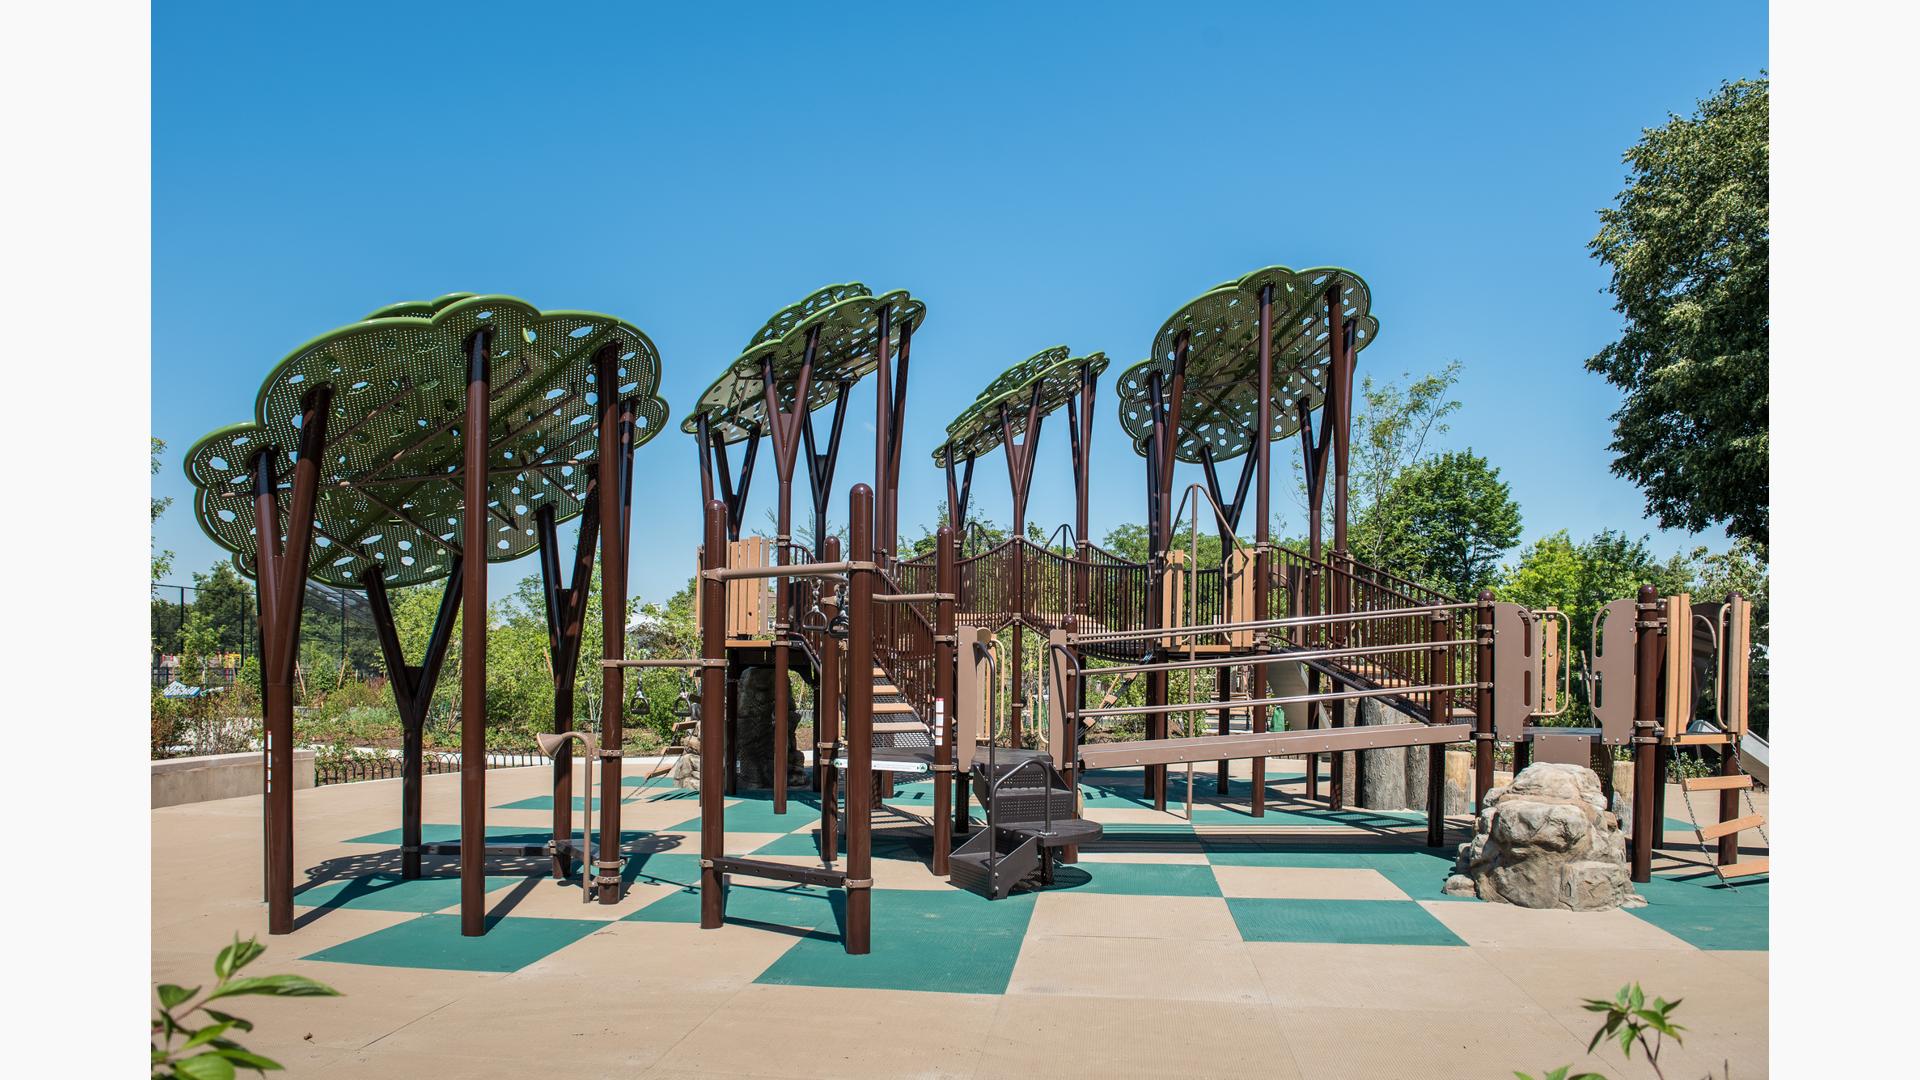 Custom tree structures tower over PlayBooster play structure. Log Steppers and rock climbers offer a realistic, natural look to the playground. Play area sits on a green and tan checkered ground surface.